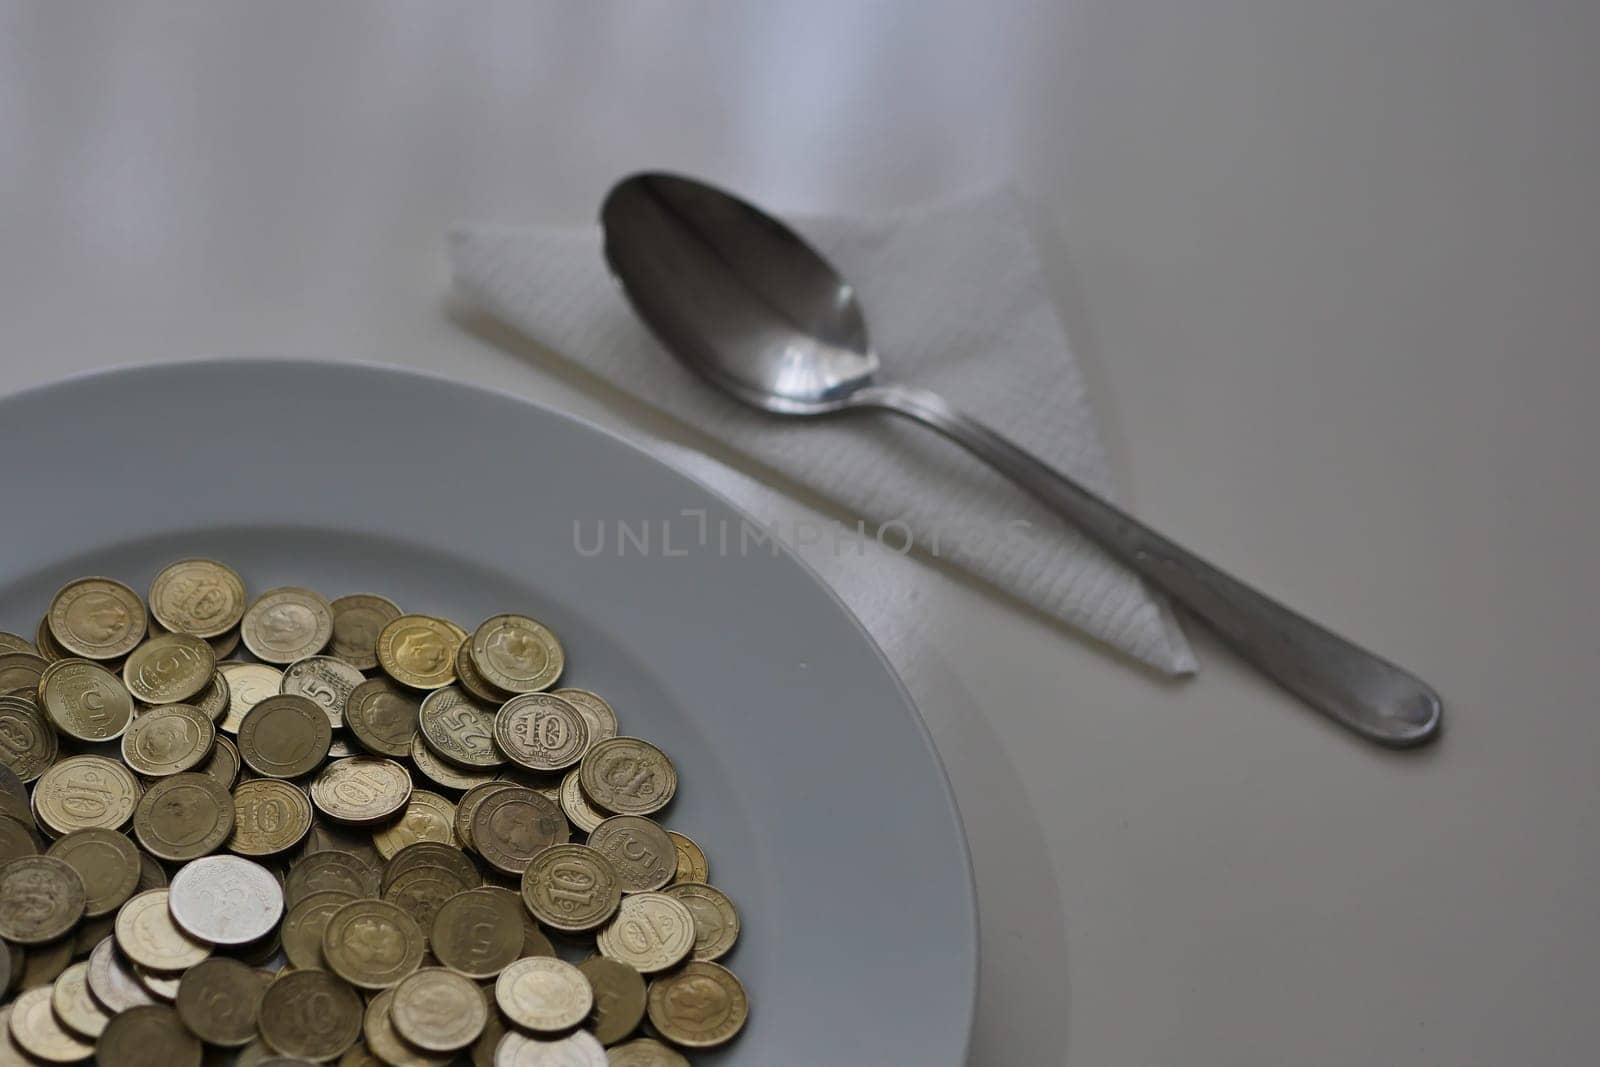 a plate full of coins on a table and a spoon next to it, spending money, by nhatipoglu